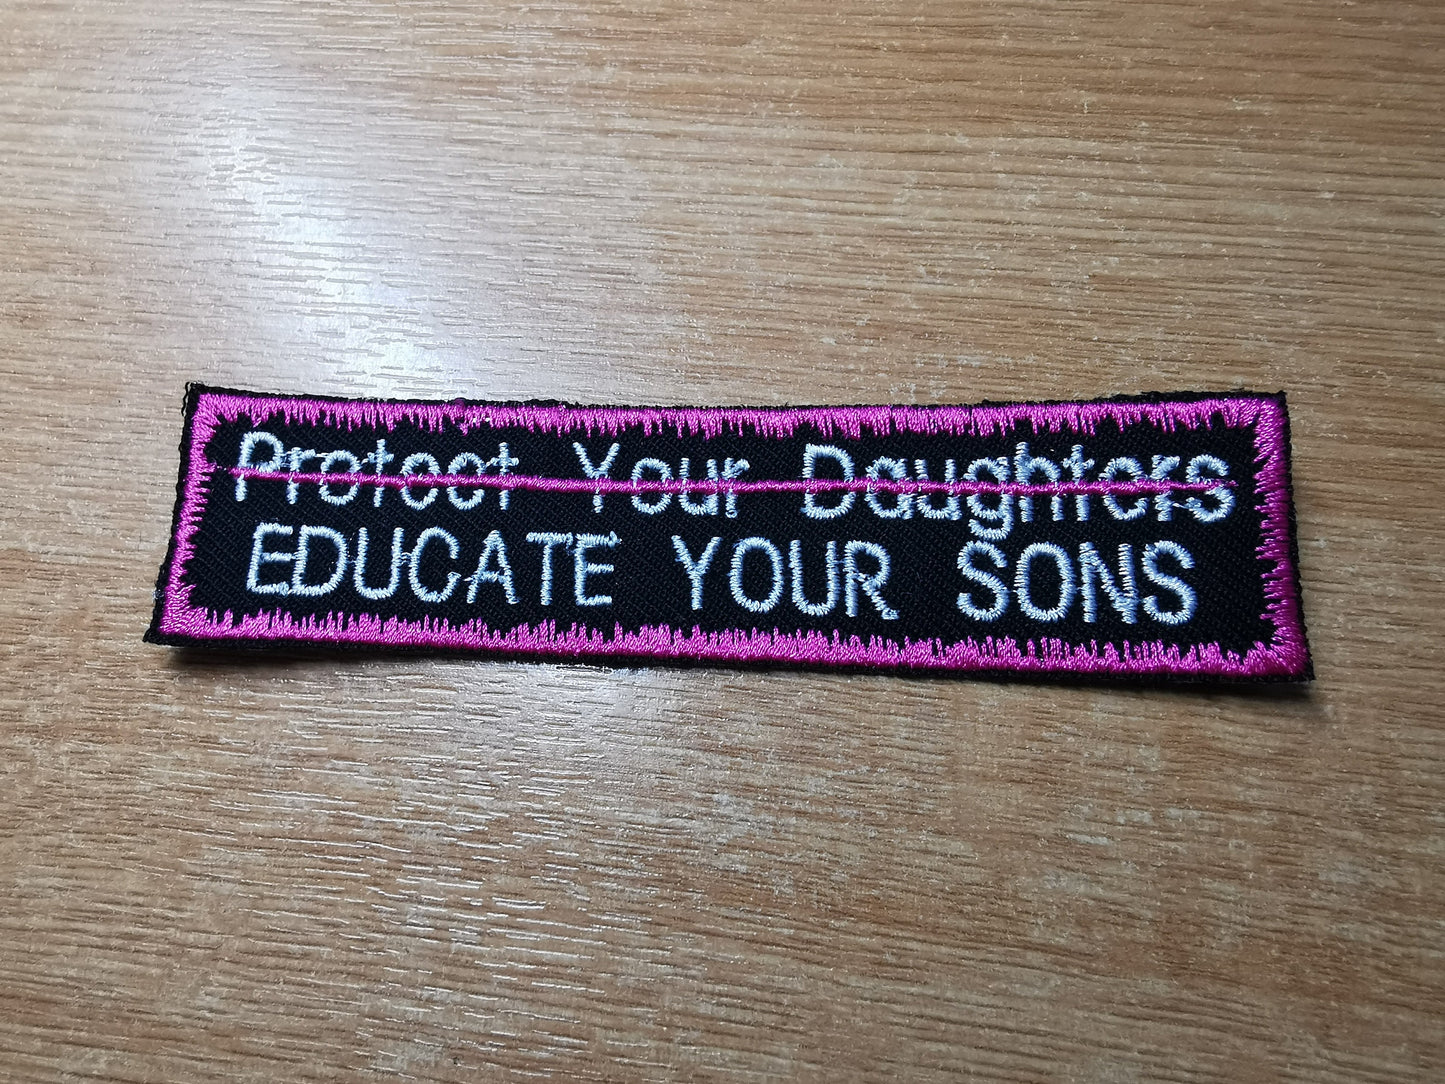 Educate Your Sons Not Protect Your Daughters Embroidered Patch Patriarchy Feminist Protest Patch - Flamingo Pink!